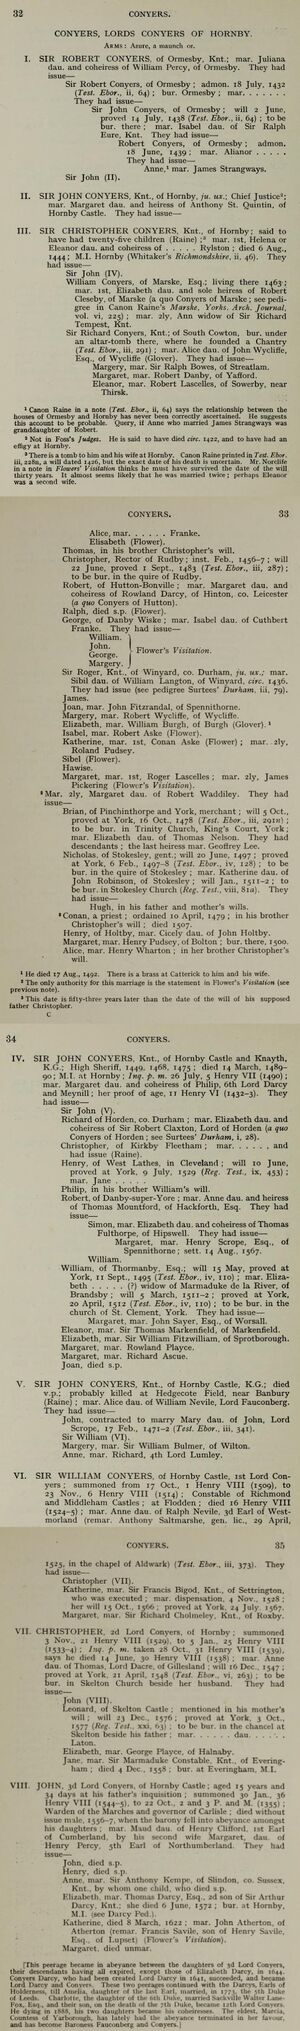 Conyers, Lords Conyers of Hornby, (Clay, 1913)